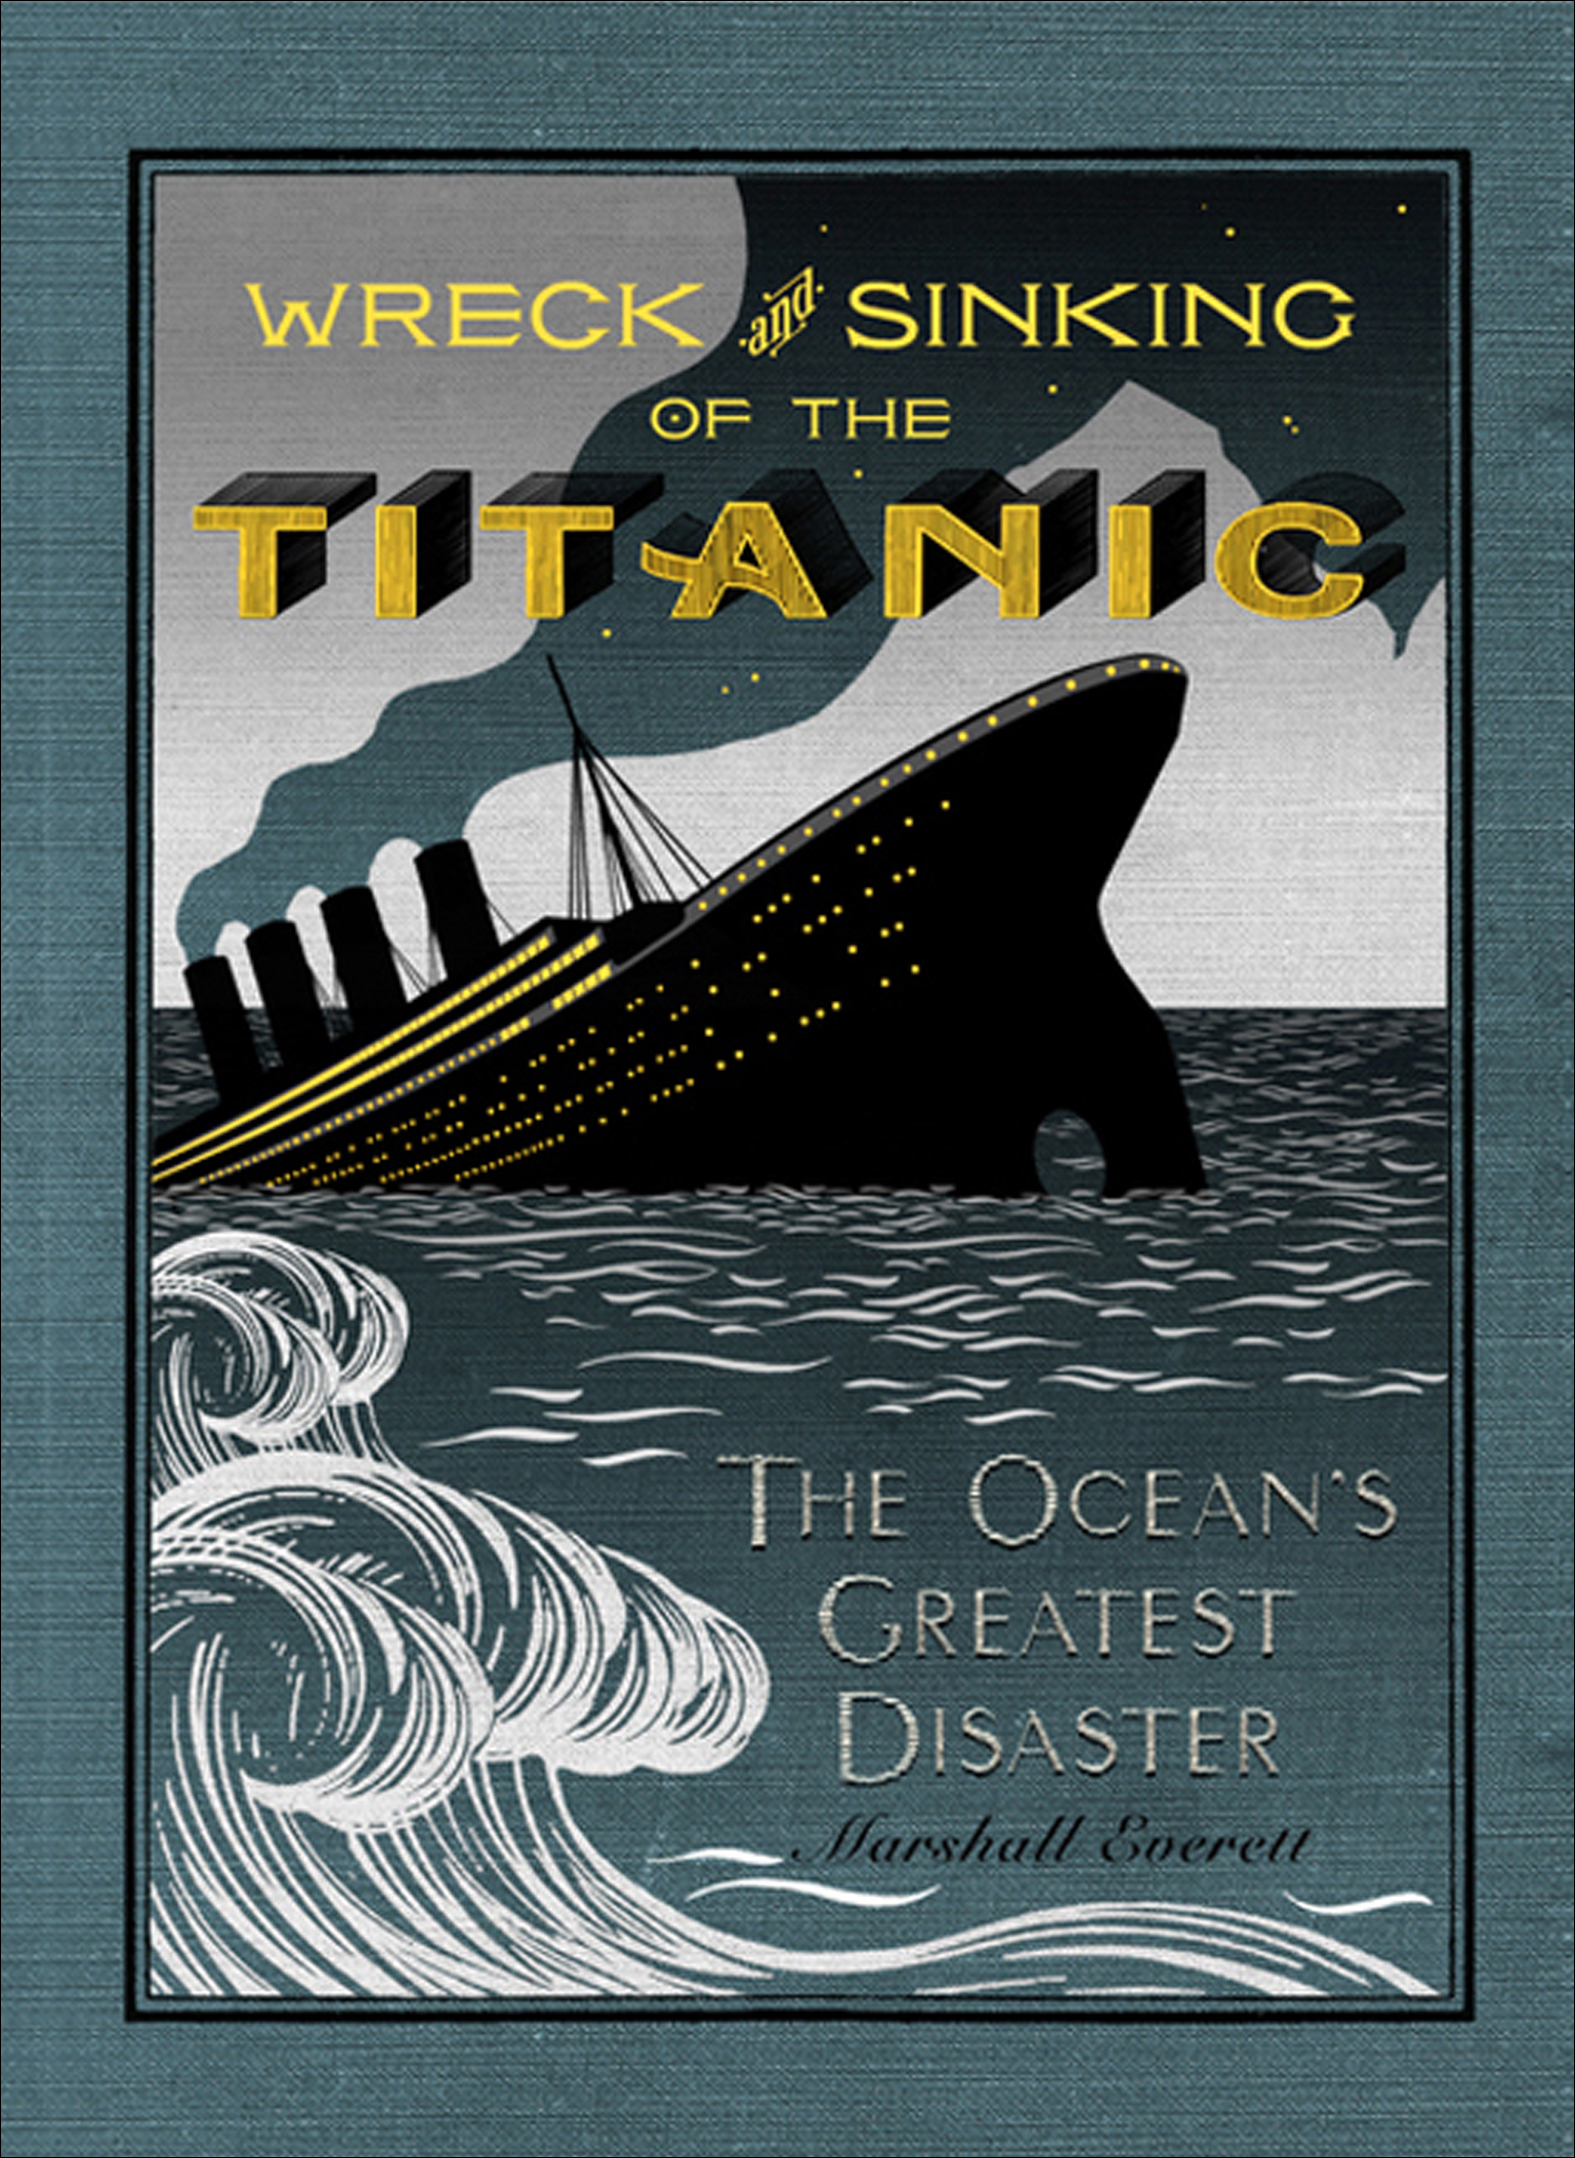 The wreck and sinking of the Titanic cover image